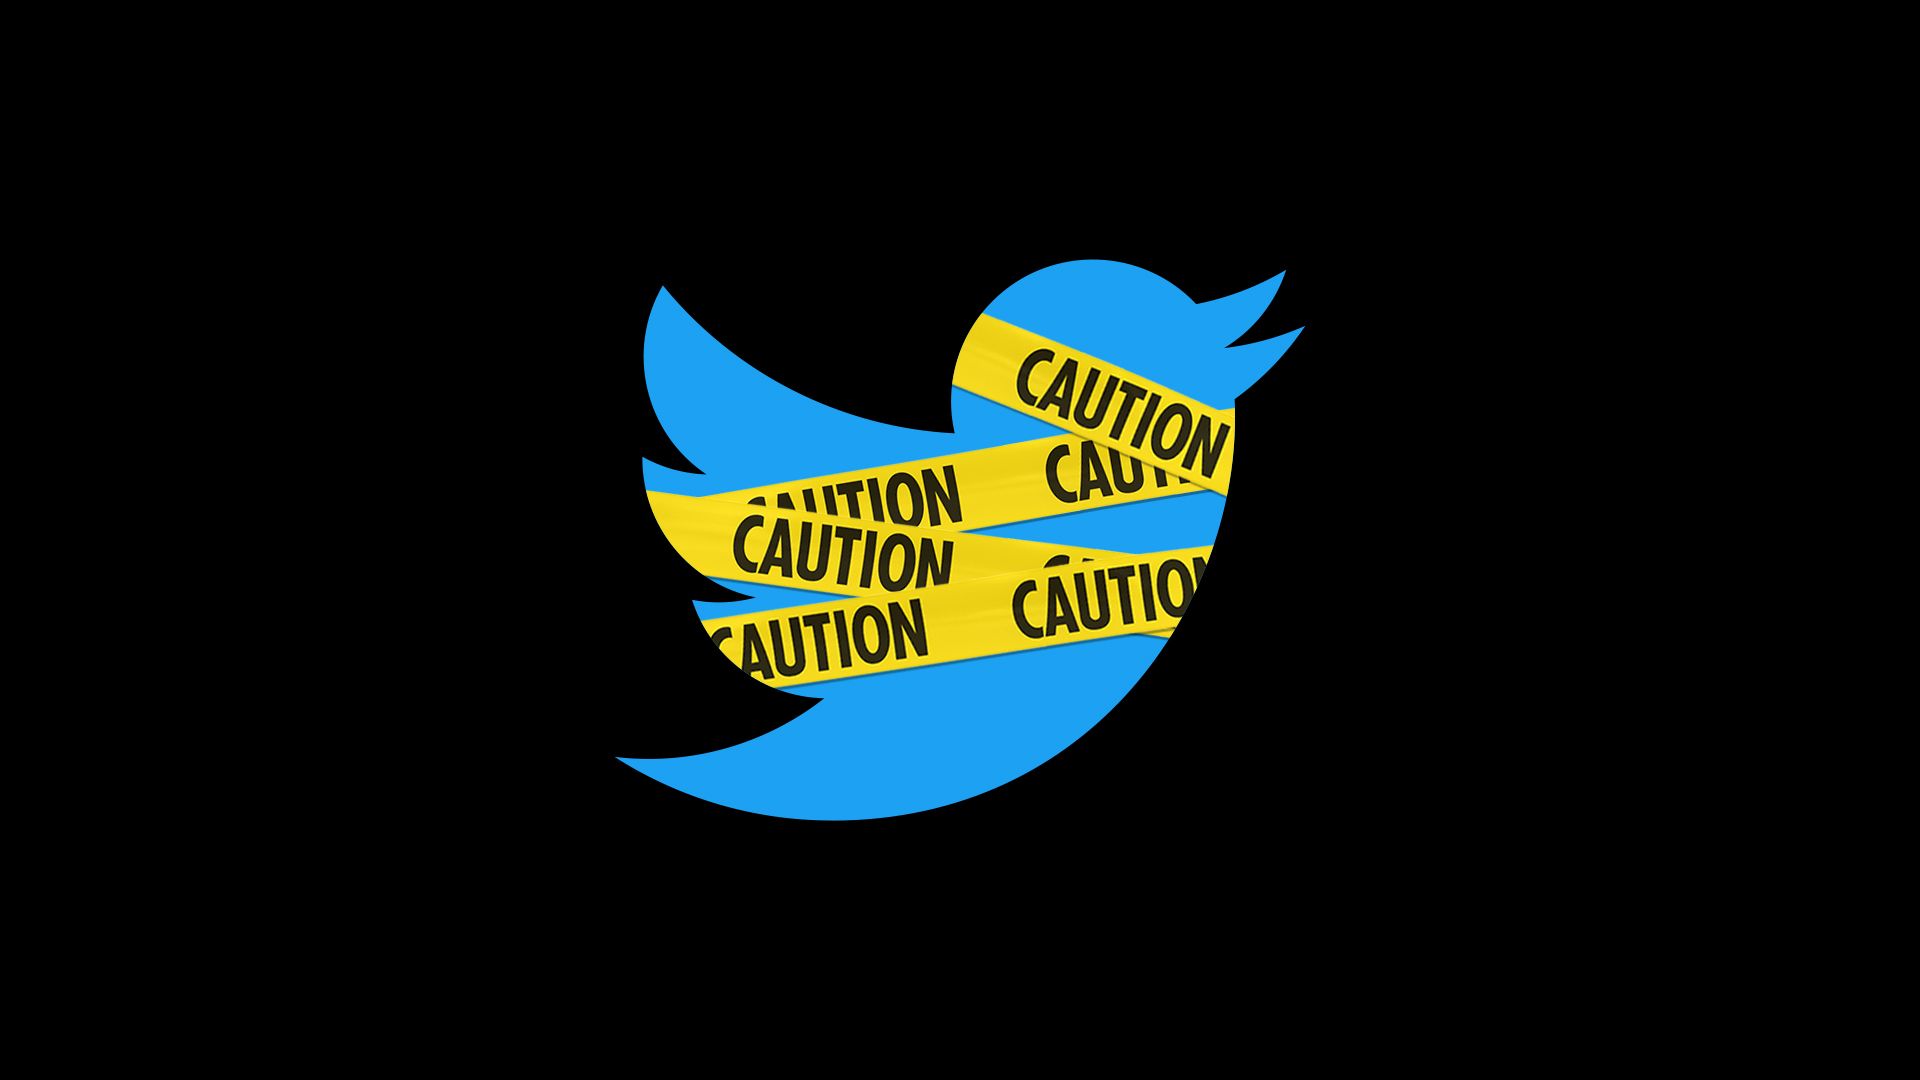 Illustration of twitter logo wrapped in caution tape